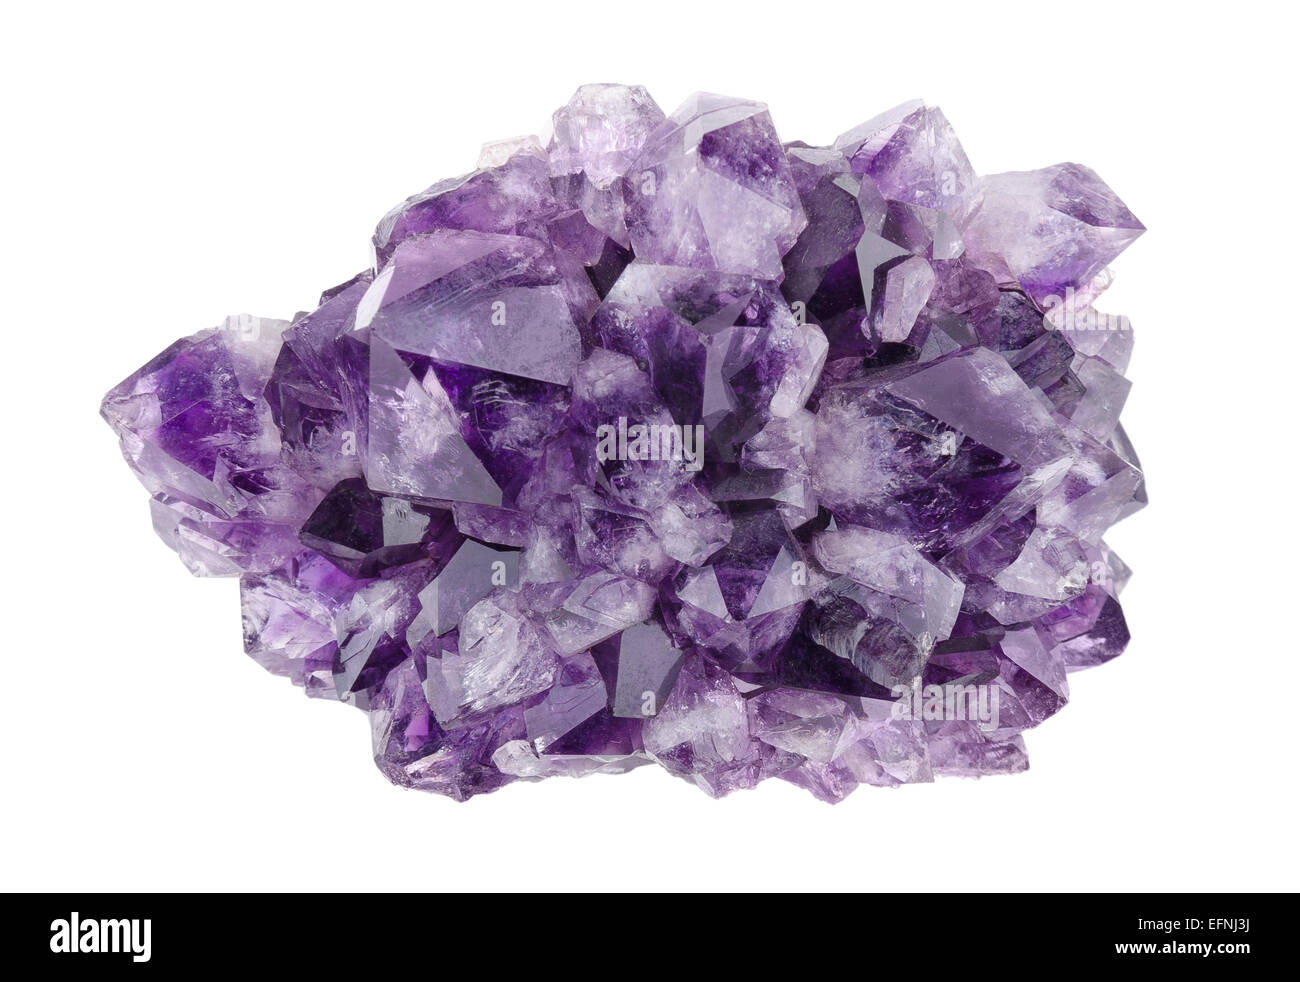 Amethyst directly above over white background, a violet variety of quartz, often used in jewelry. Silica, silicon dioxide, SiO2. Stock Photo